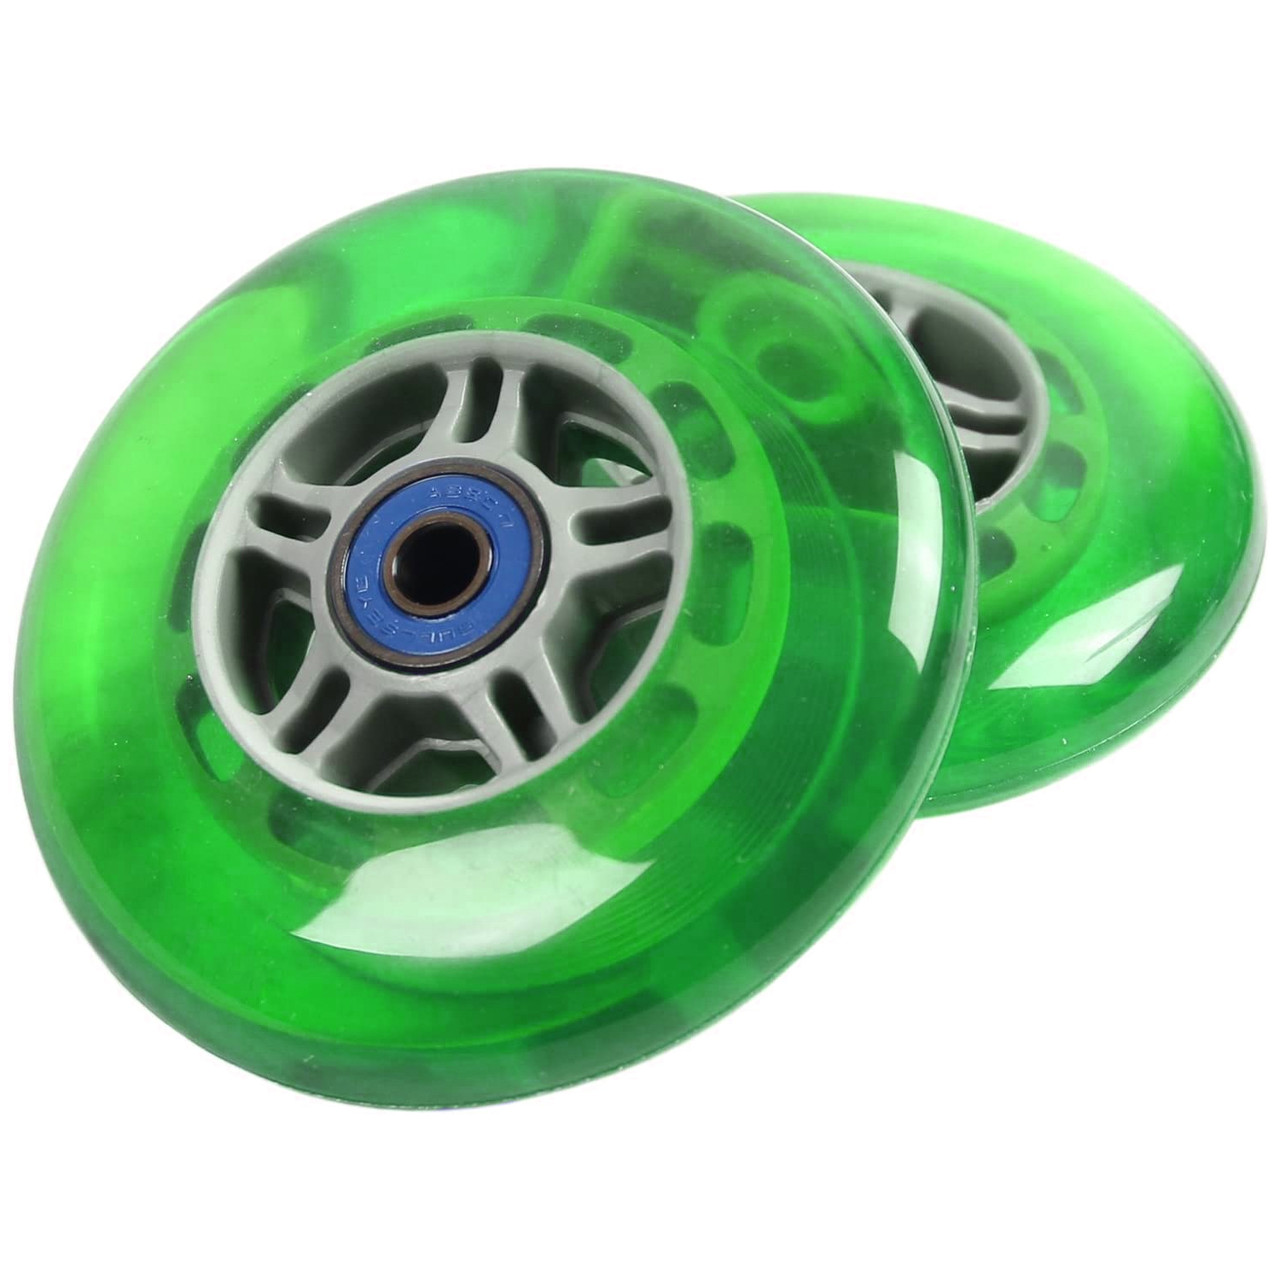 Replacement Scooter Wheels with Bearings 2-Pack - 100mm Outdoor - Green  (Buy with Prime)